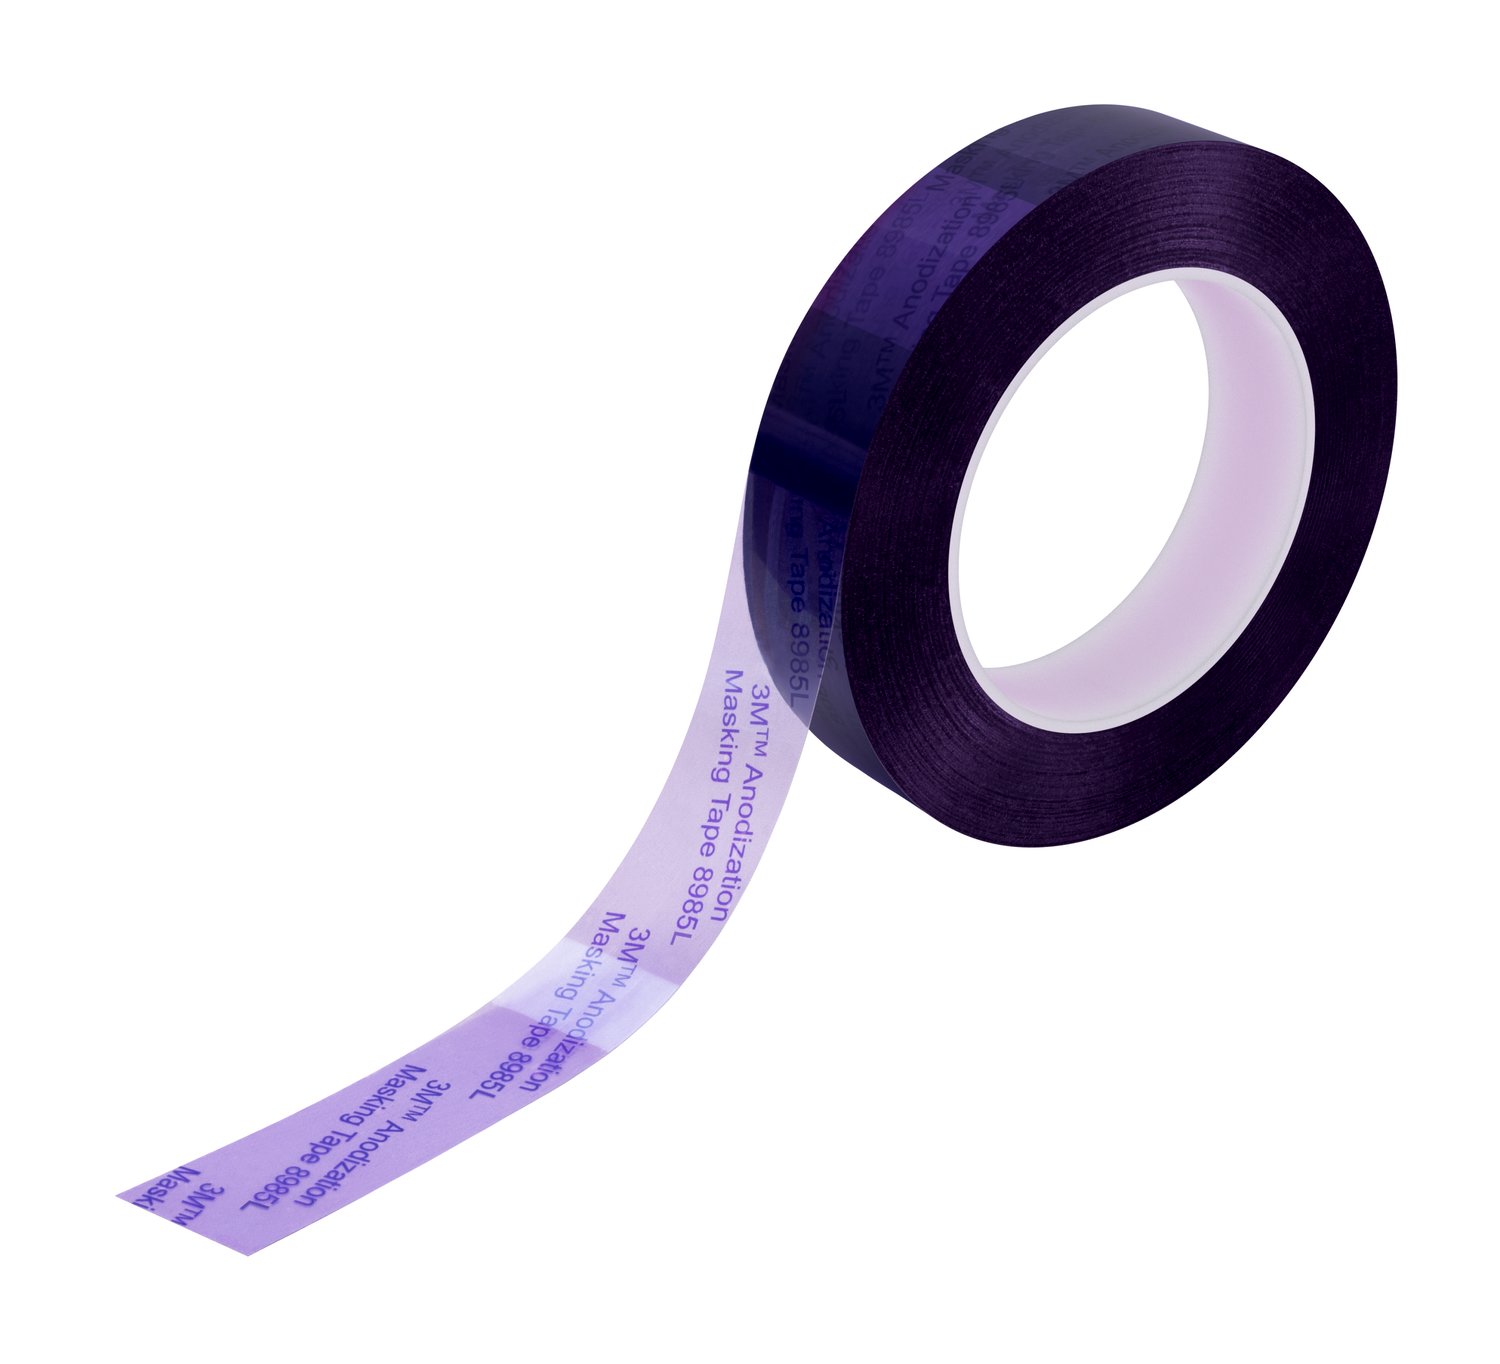 BT-908 Specialty High Temperature Pink Masking Tape